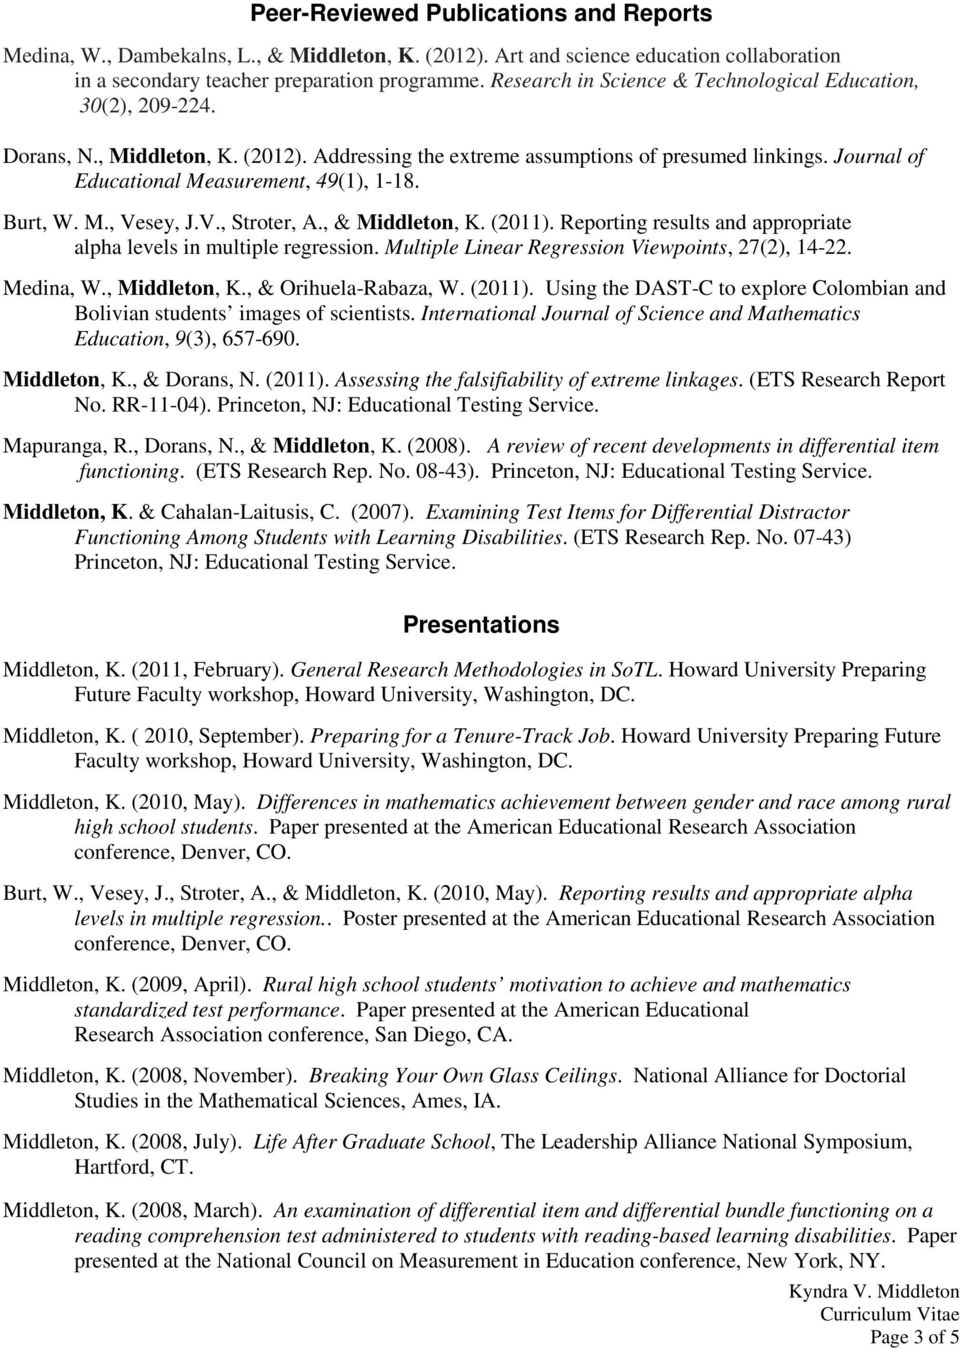 Journal of Educational Measurement, 49(1), 1-18. Burt, W. M., Vesey, J.V., Stroter, A., & Middleton, K. (2011). Reporting results and appropriate alpha levels in multiple regression.